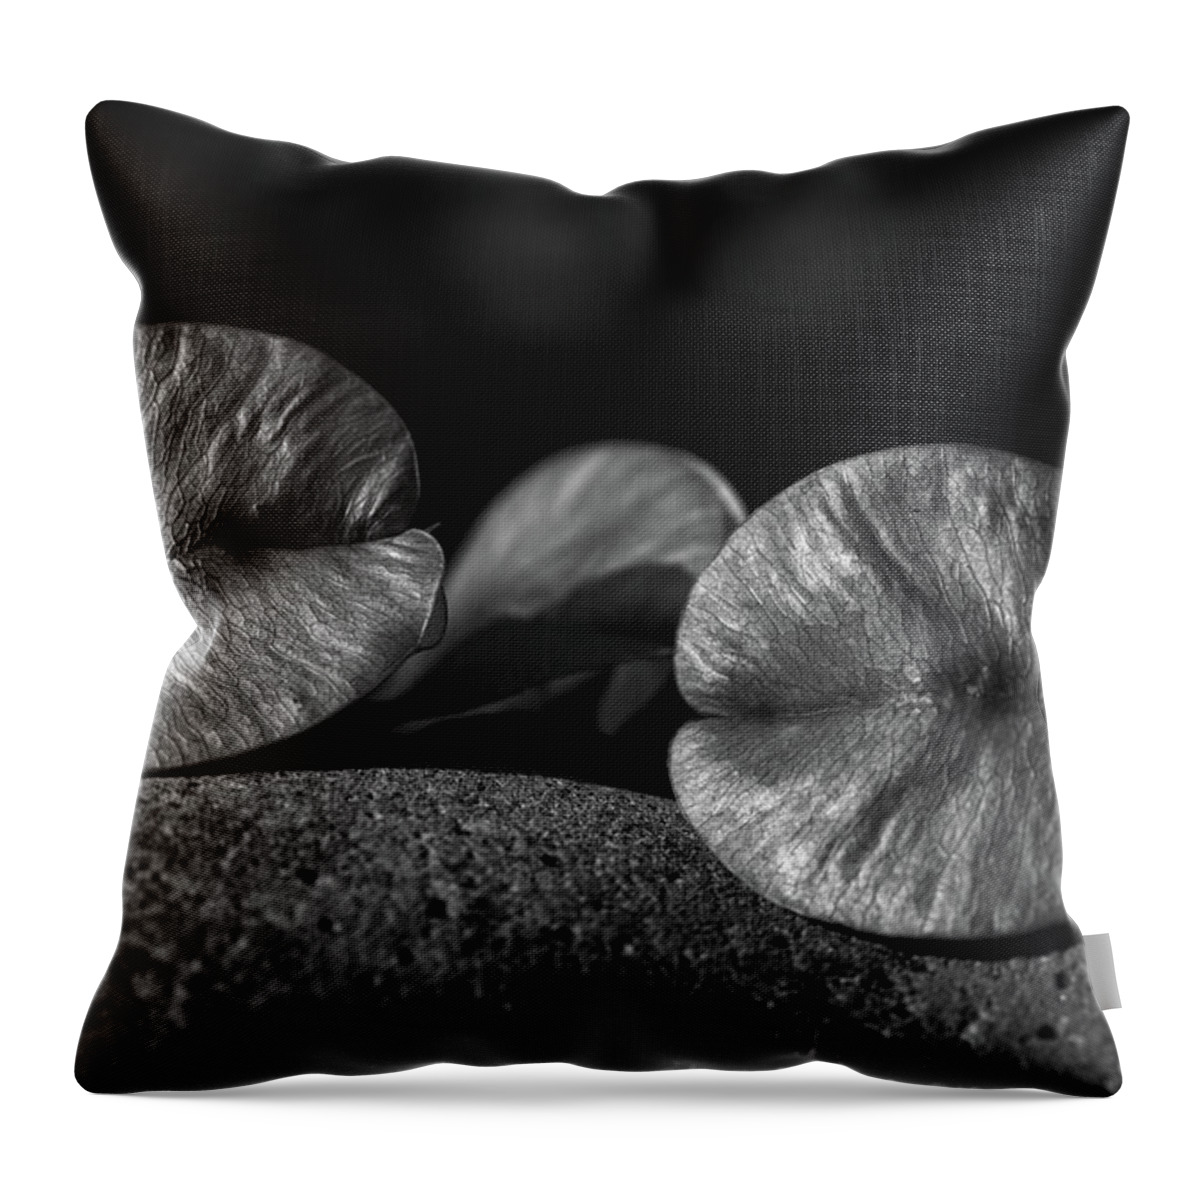 Goldenrain Tree Throw Pillow featuring the photograph Goldenrain leaves 2 by Richard Rizzo